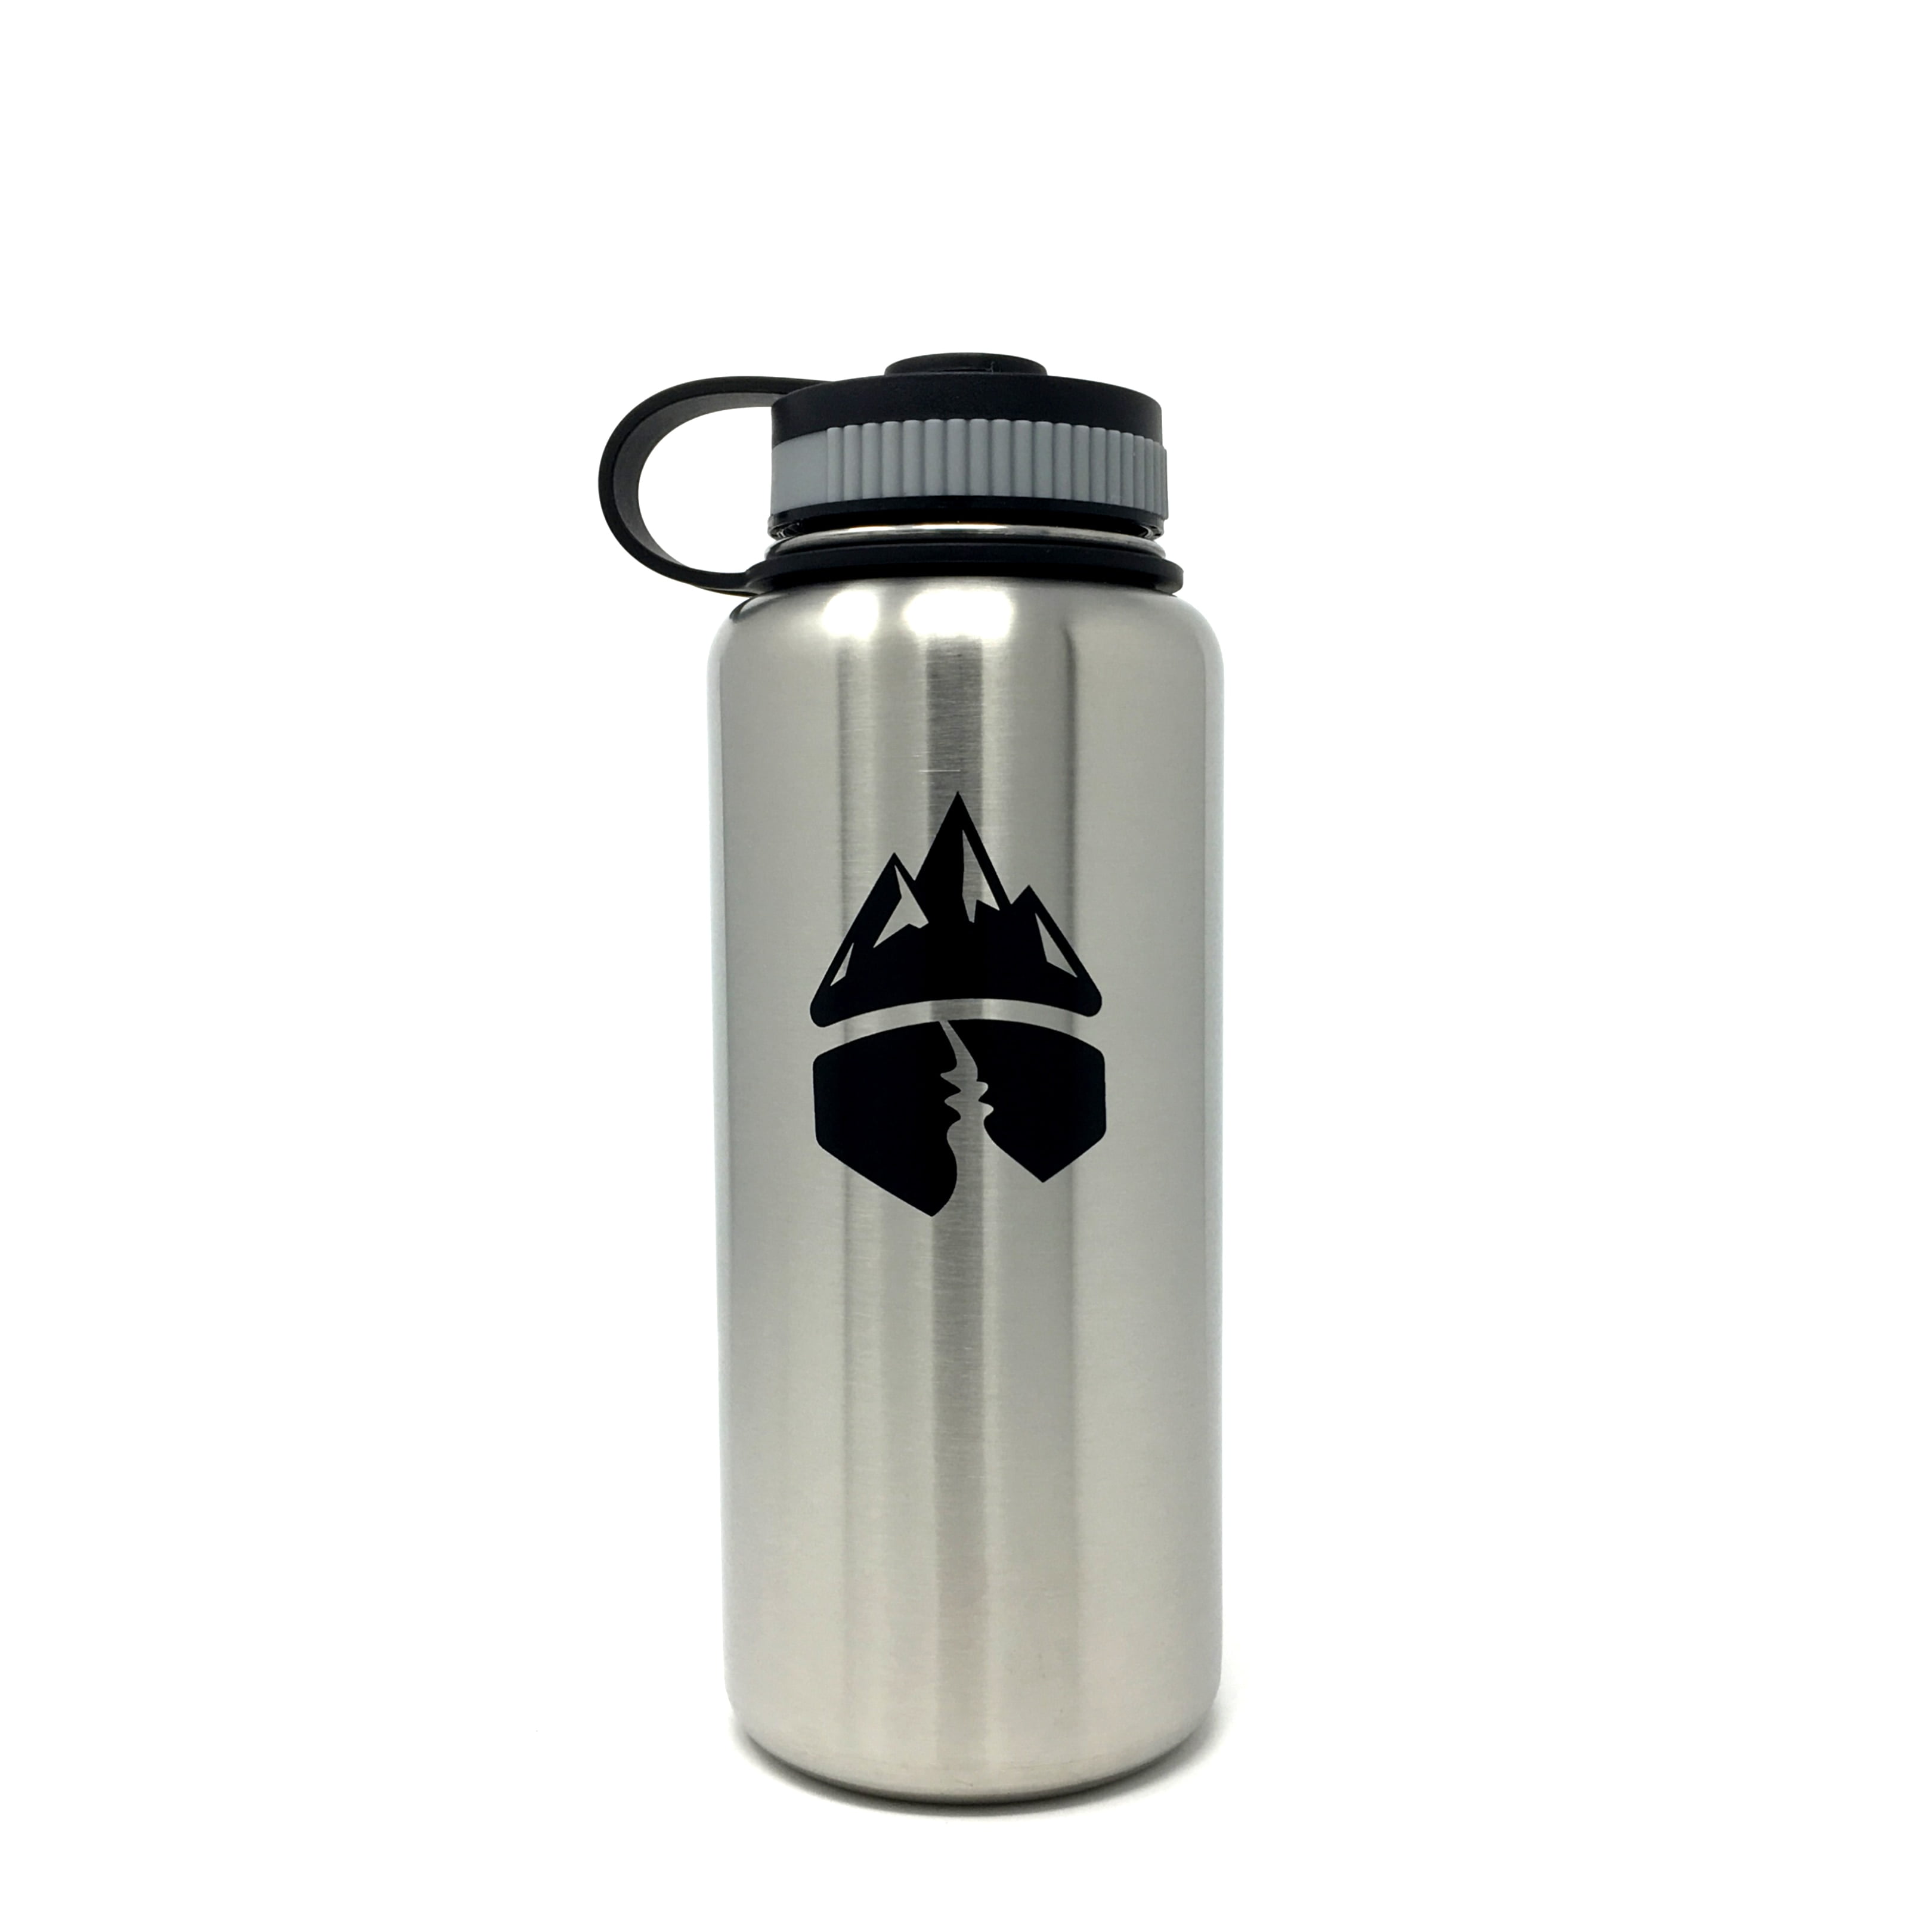 Campsite Essentials Wide Mouth Insulated Stainless Steel Water Bottle 32oz 